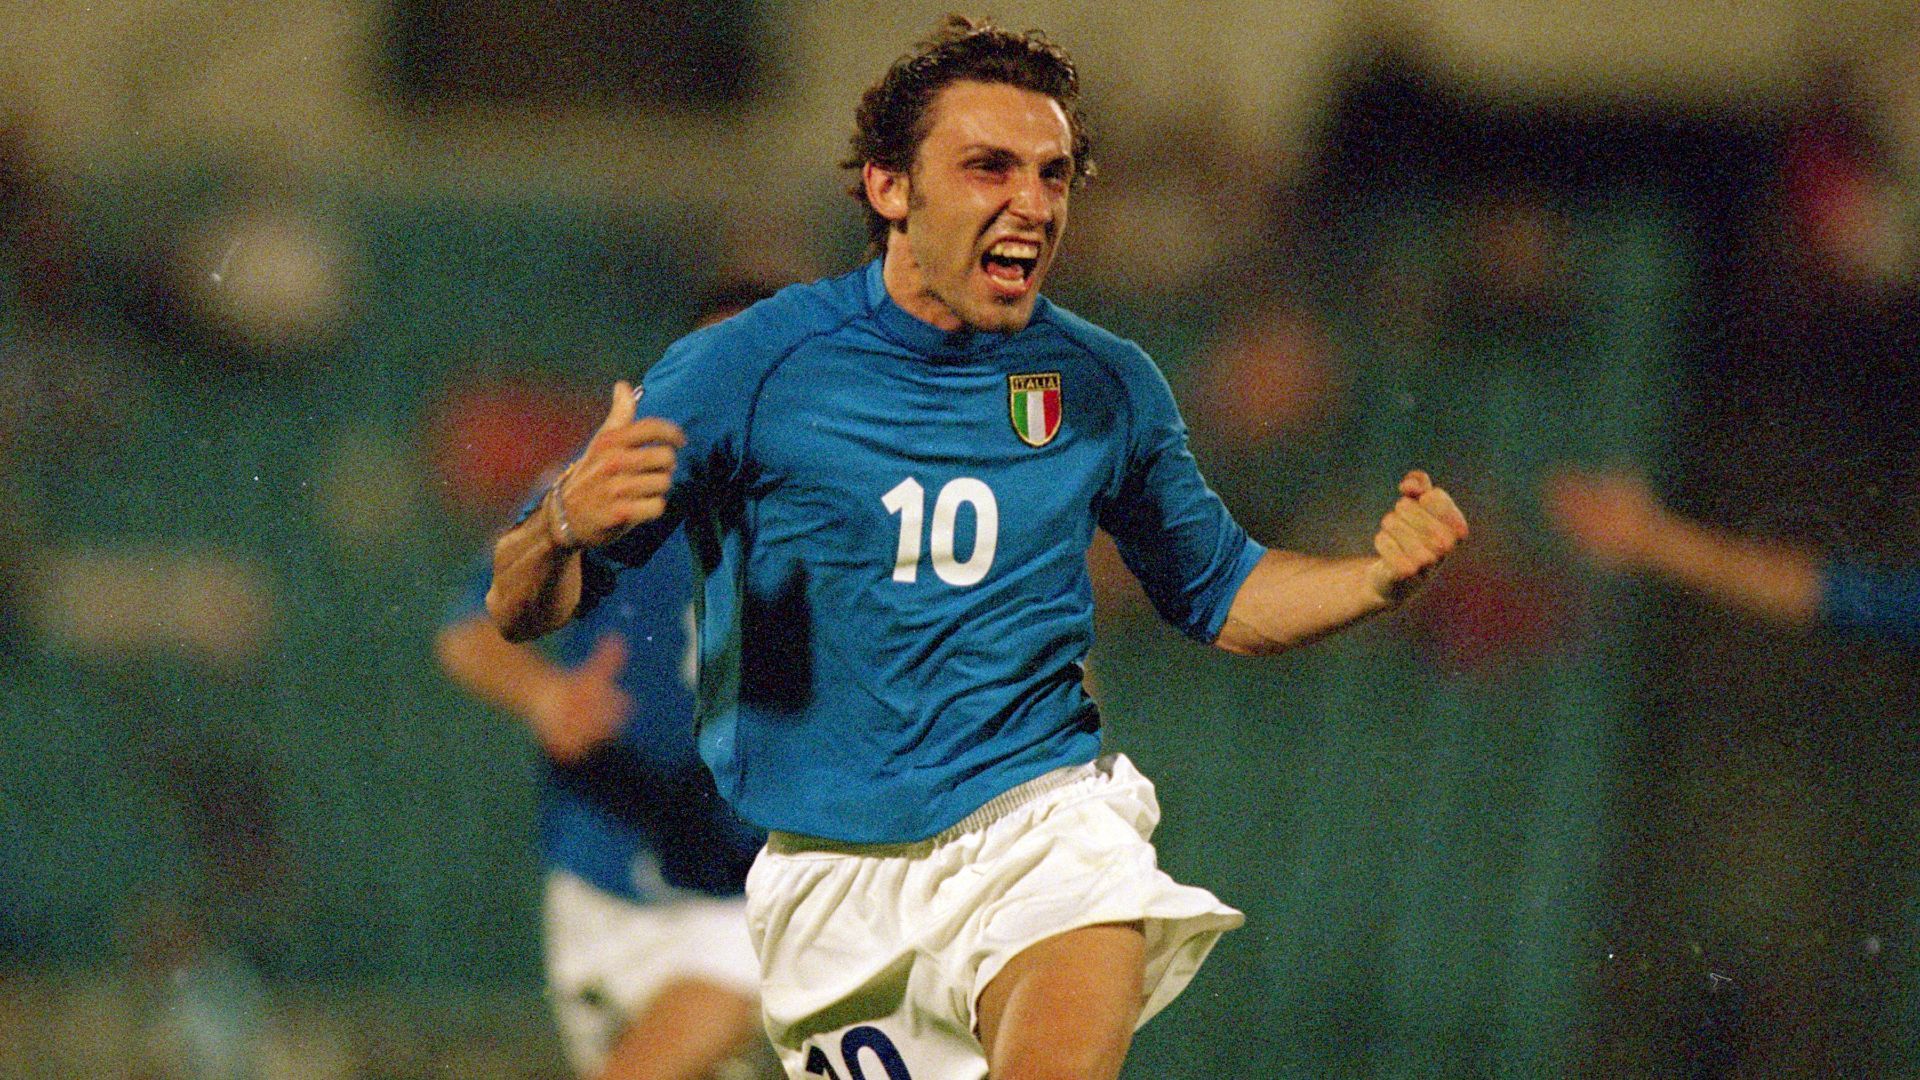 
                <strong>2000 - Andrea Pirlo (Italien)</strong><br>
                &#x2022; <strong>Anzahl der A-Länderspiele:</strong> 116<br>&#x2022; <strong>spätere Erfolge: </strong>Weltmeister 2006<br>
              